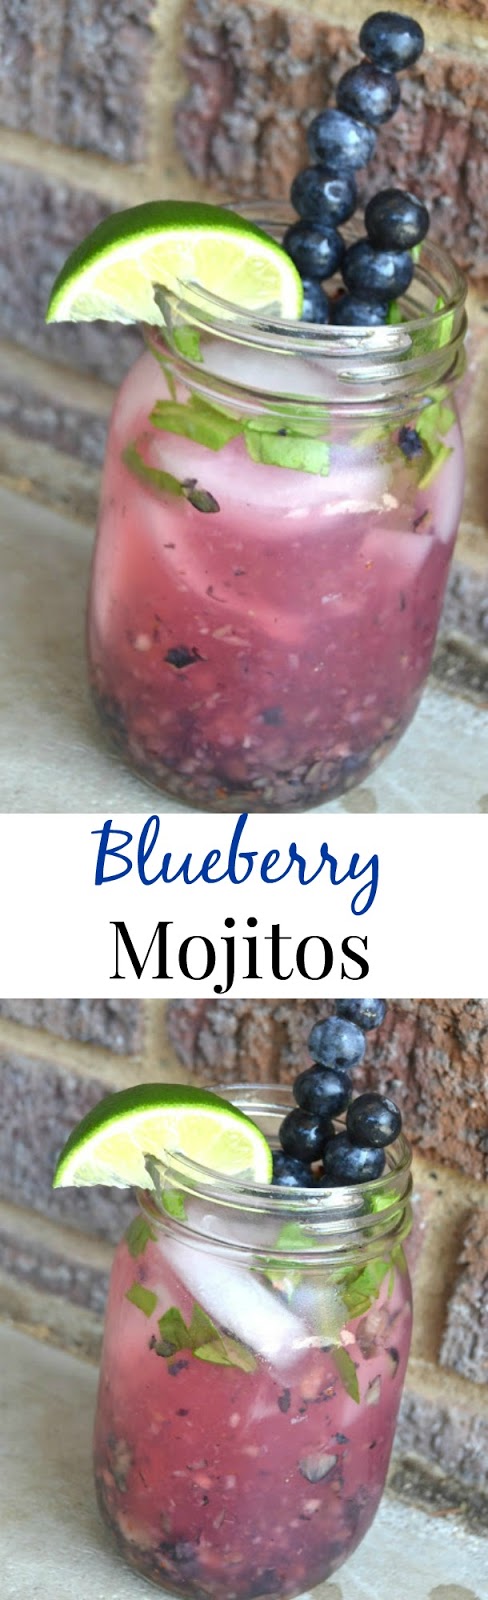 These blueberry mojitos are the perfect beverage for a hot day! Full of flavor and delicious! www.nutritionistreviews.com